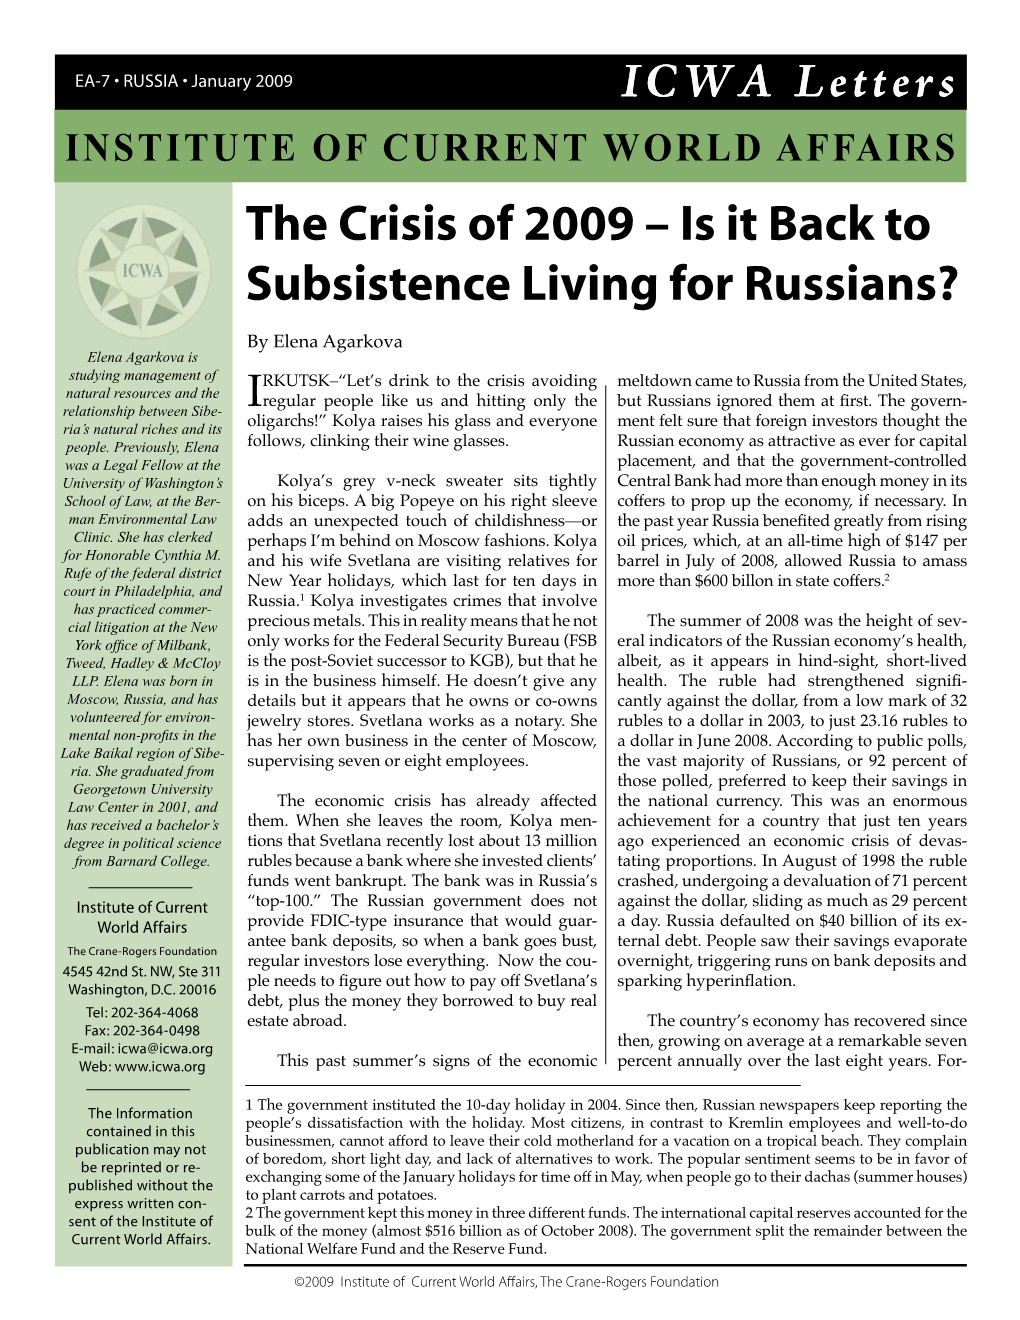 Is It Back to Subsistence Living for Russians?